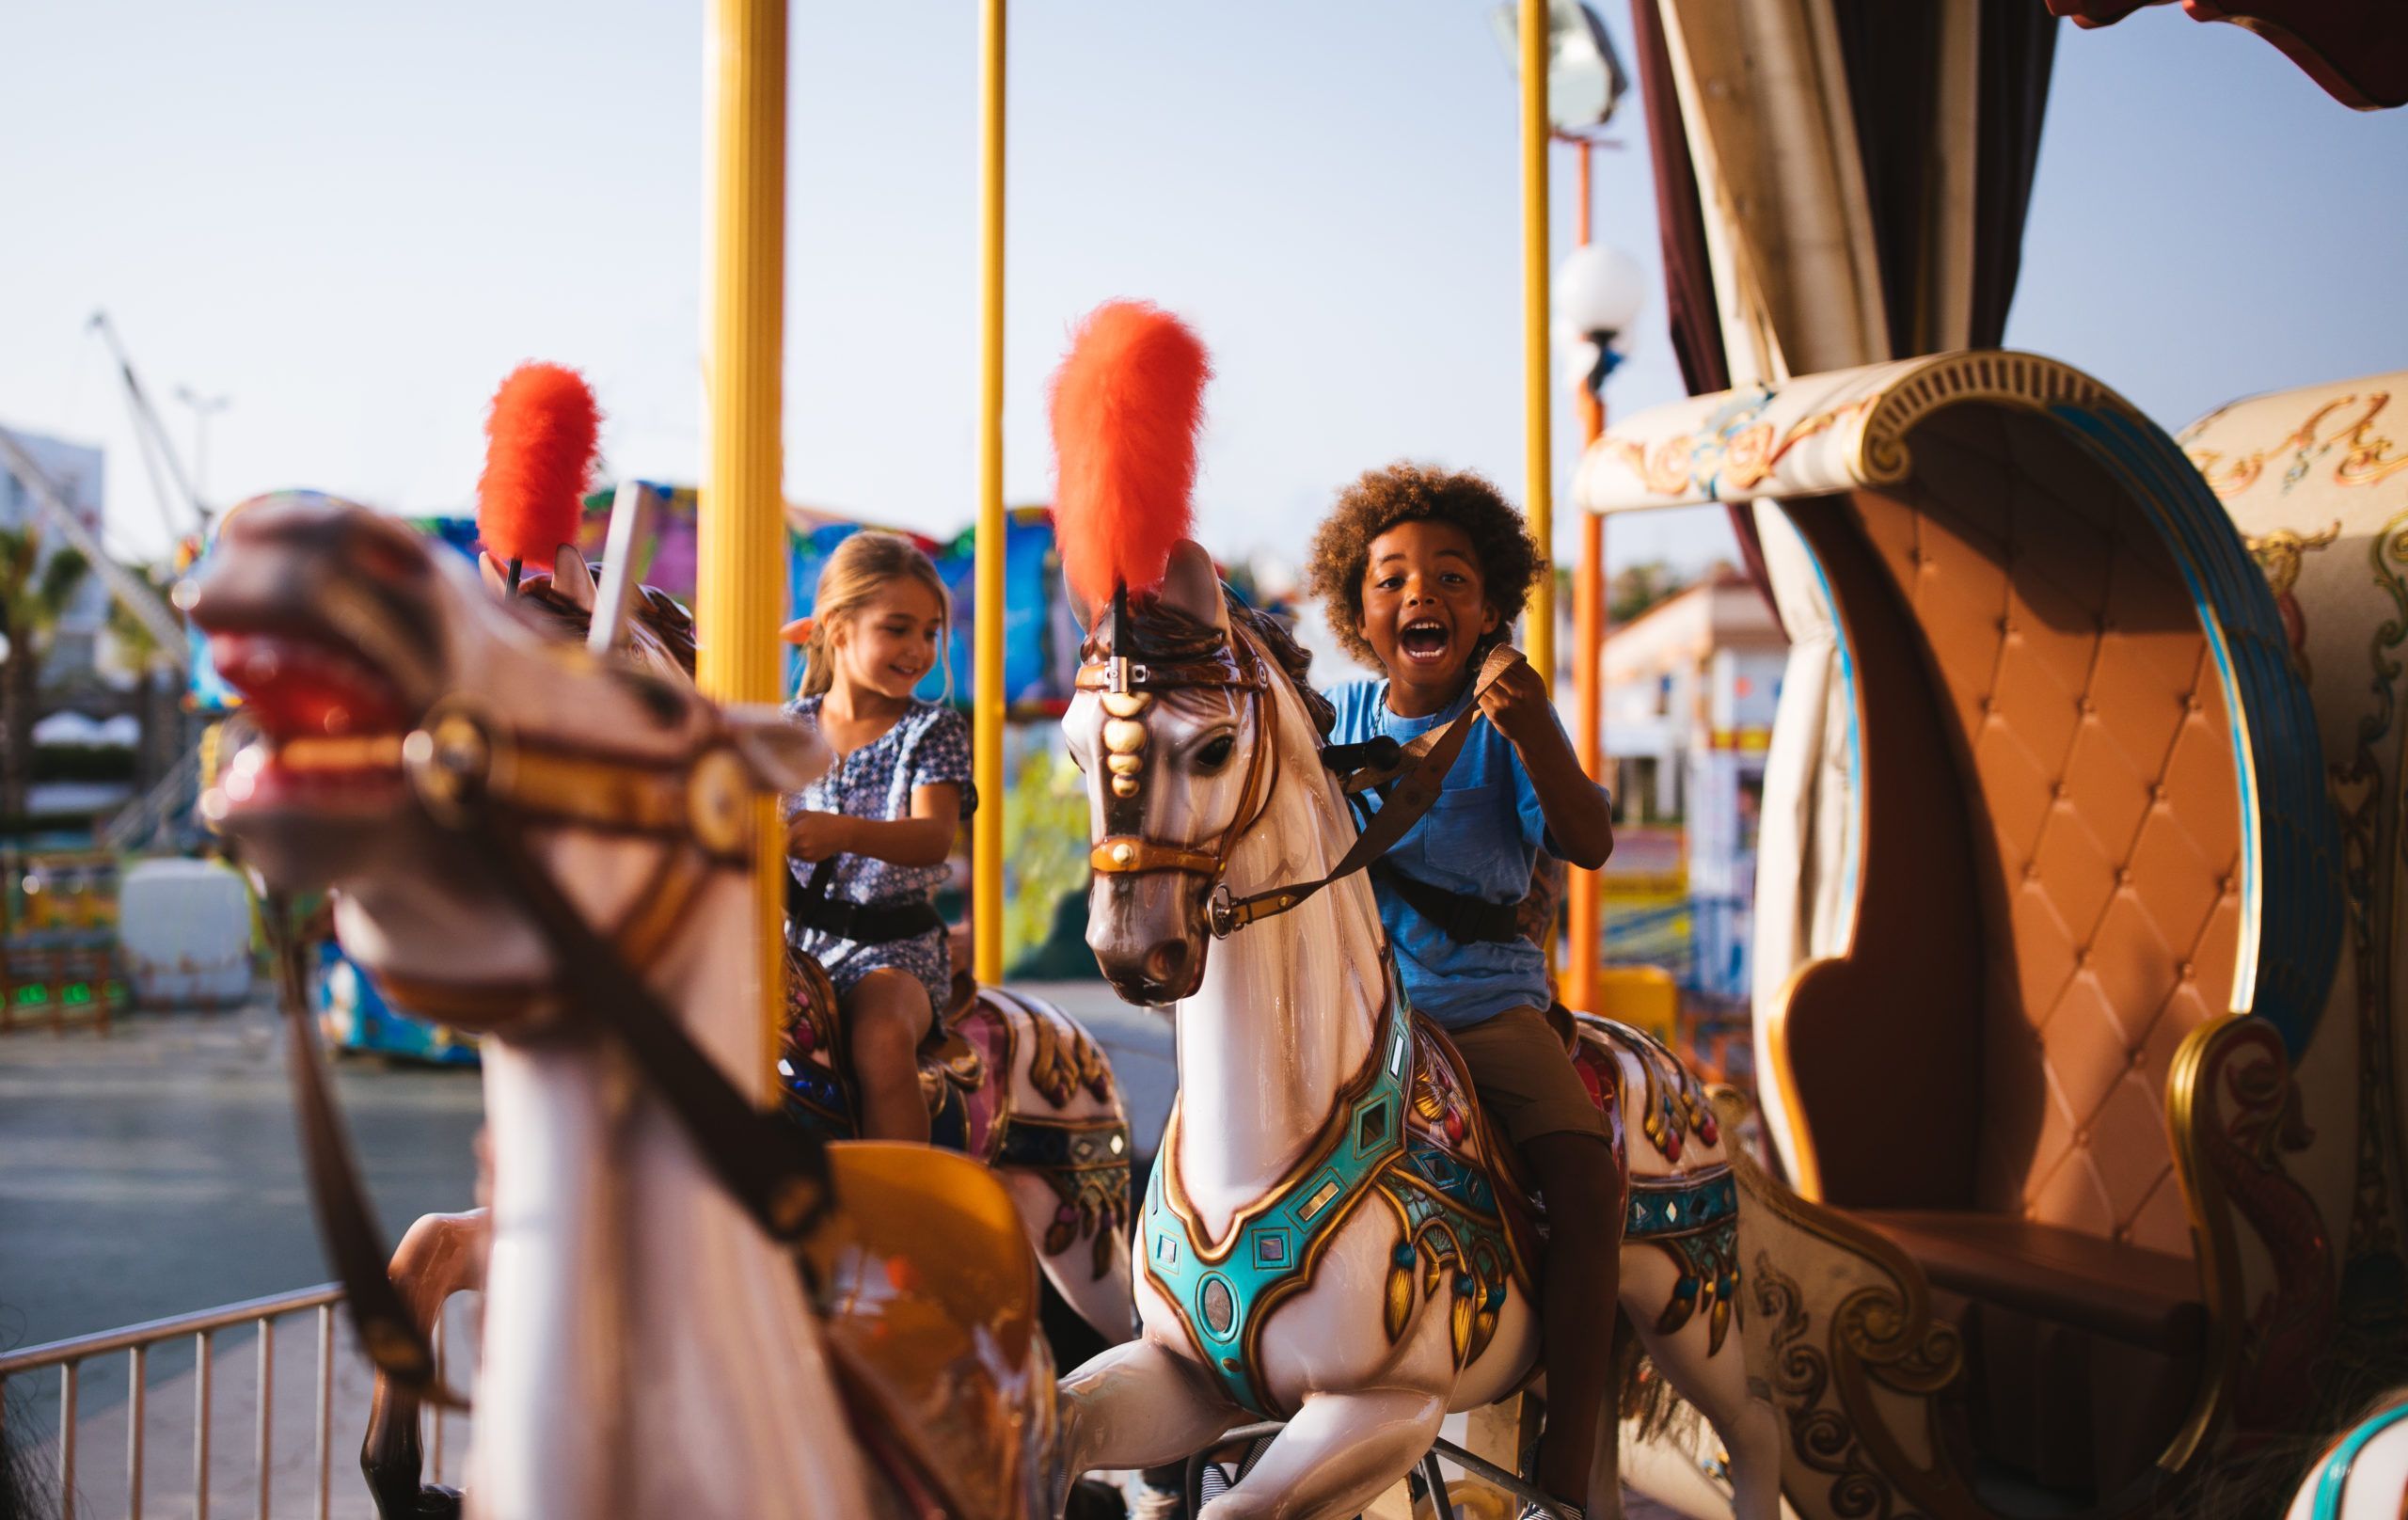 Multi-ethnic mixed family brother and sister having fun riding horses on amusement park carousel ride